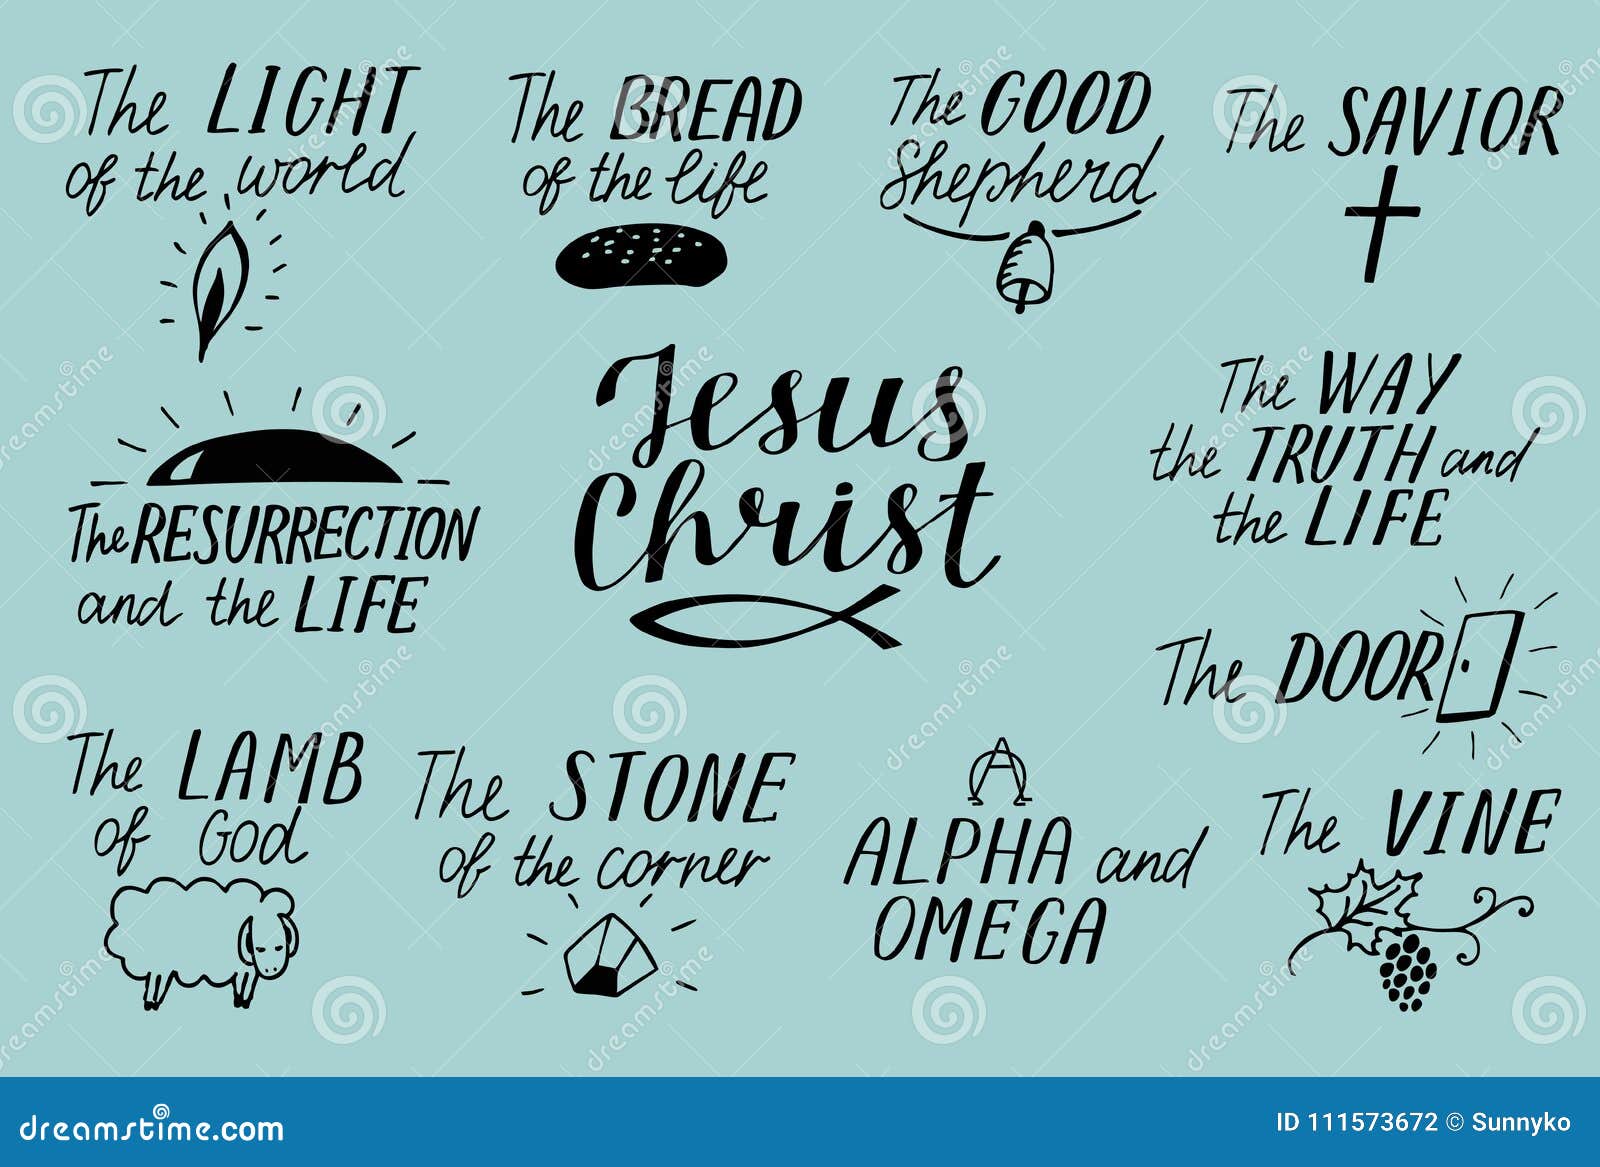 set of 11 hand lettering christian quotes about jesus christ. savior. door. good shepherd. way, truth, life. alpha and omega. lamb